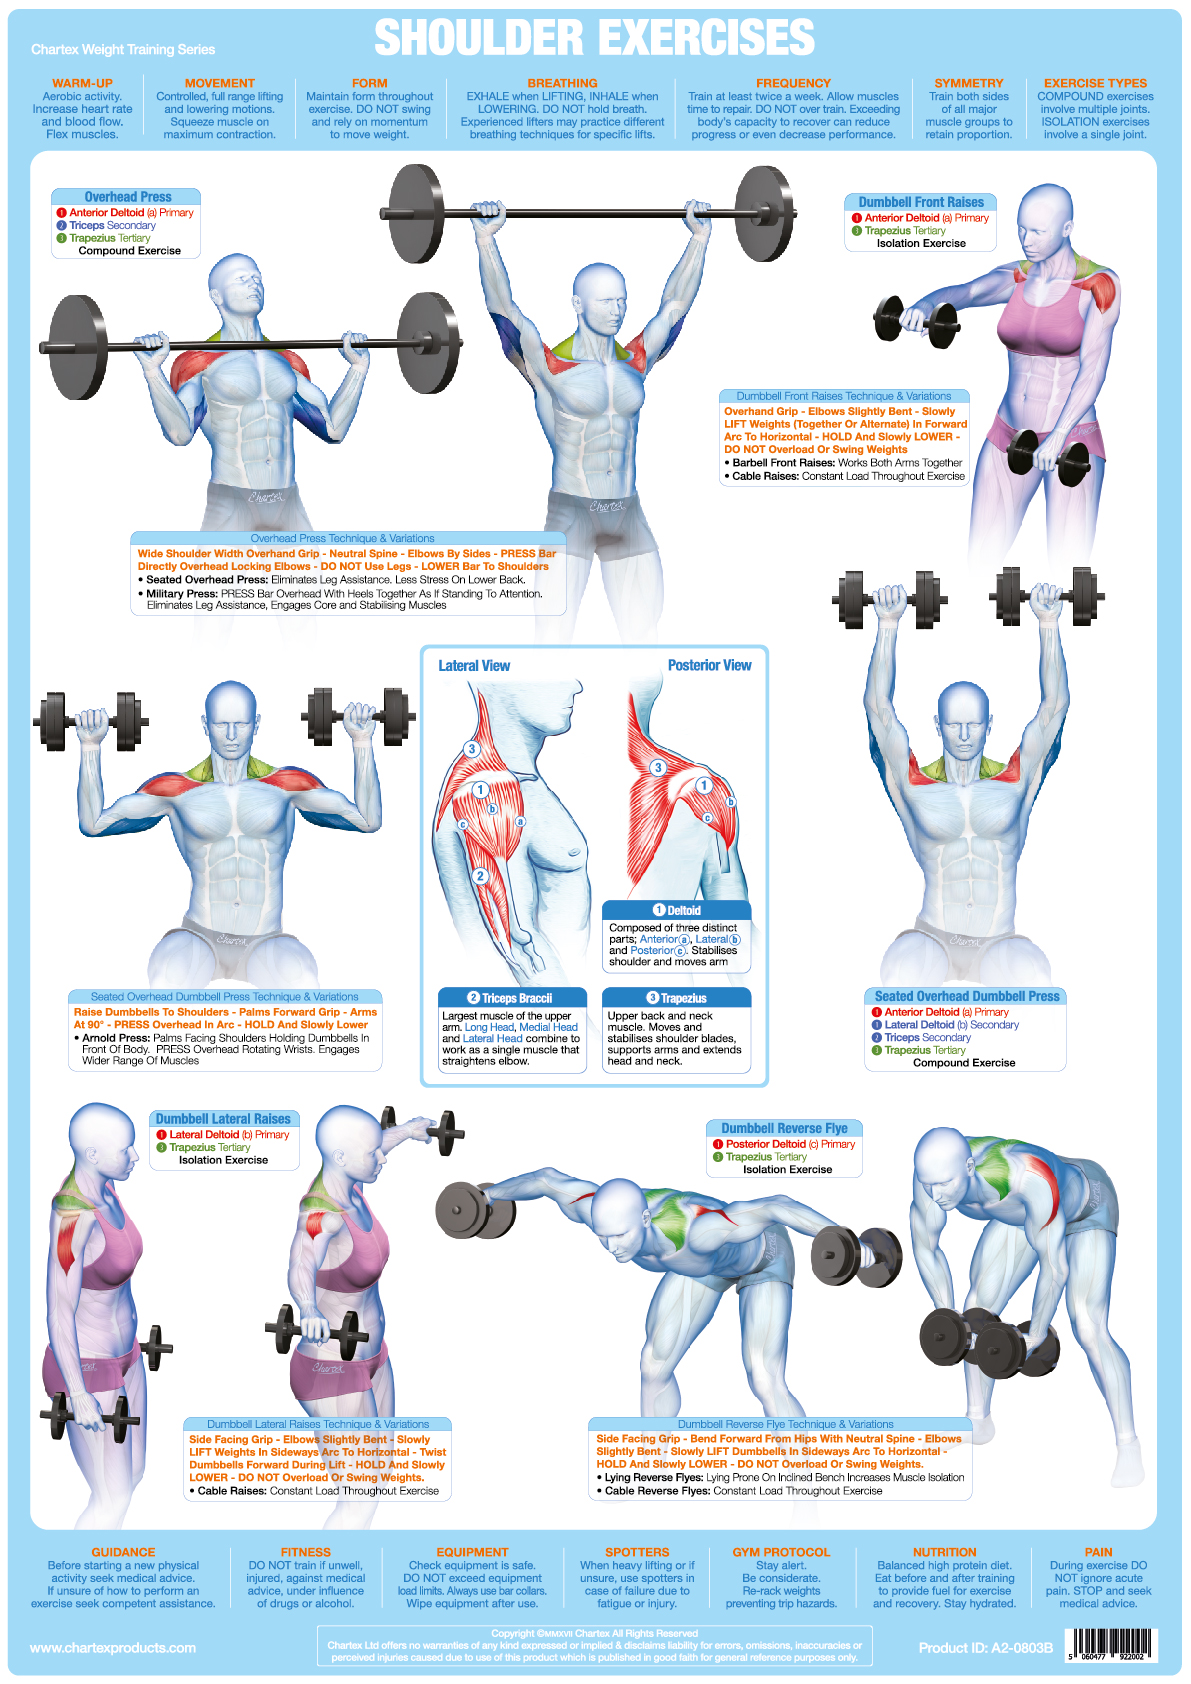 Shoulder Muscles Weight Training - A1 Chart